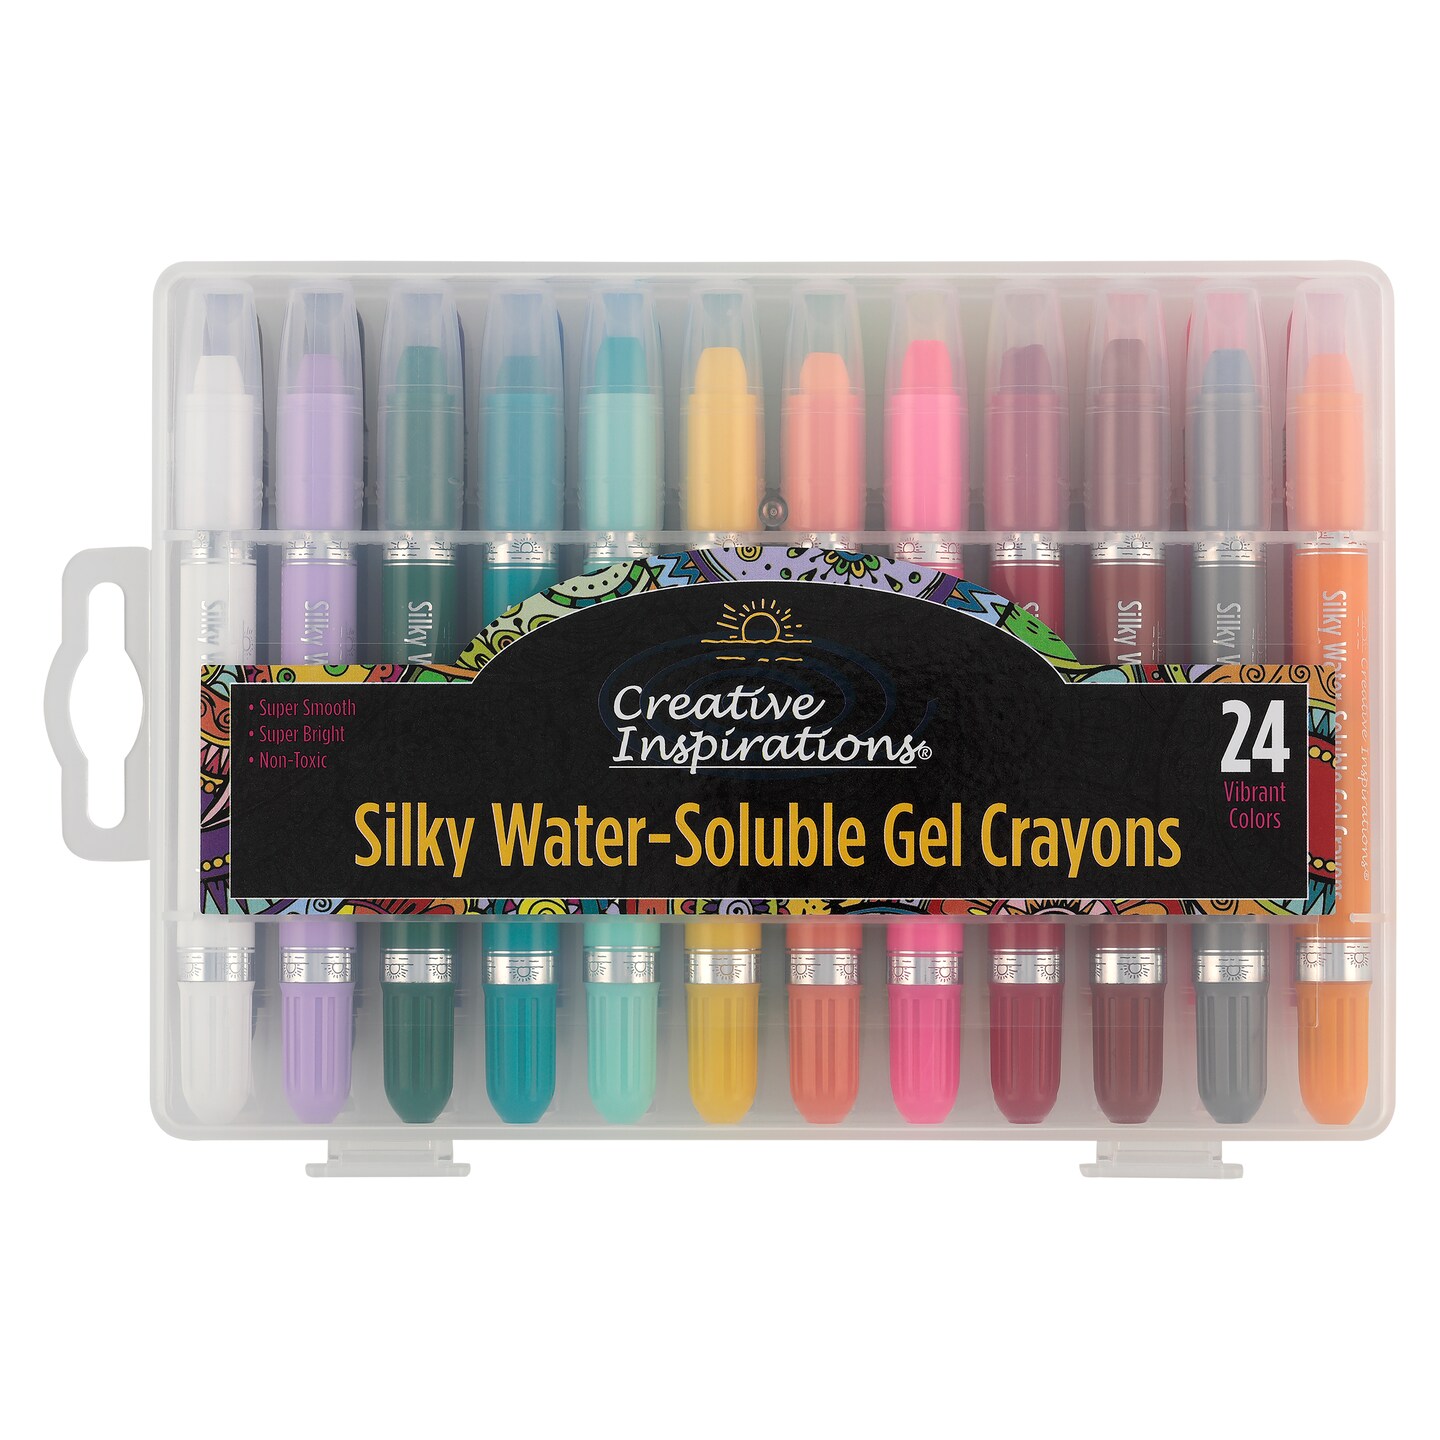 Creative Inspirations Silky Water-Soluble Gel Crayons - Professional Gel Crayons for All Ages, Artists, Scrapbooking, Travel, &#x26; More! - Set of 24